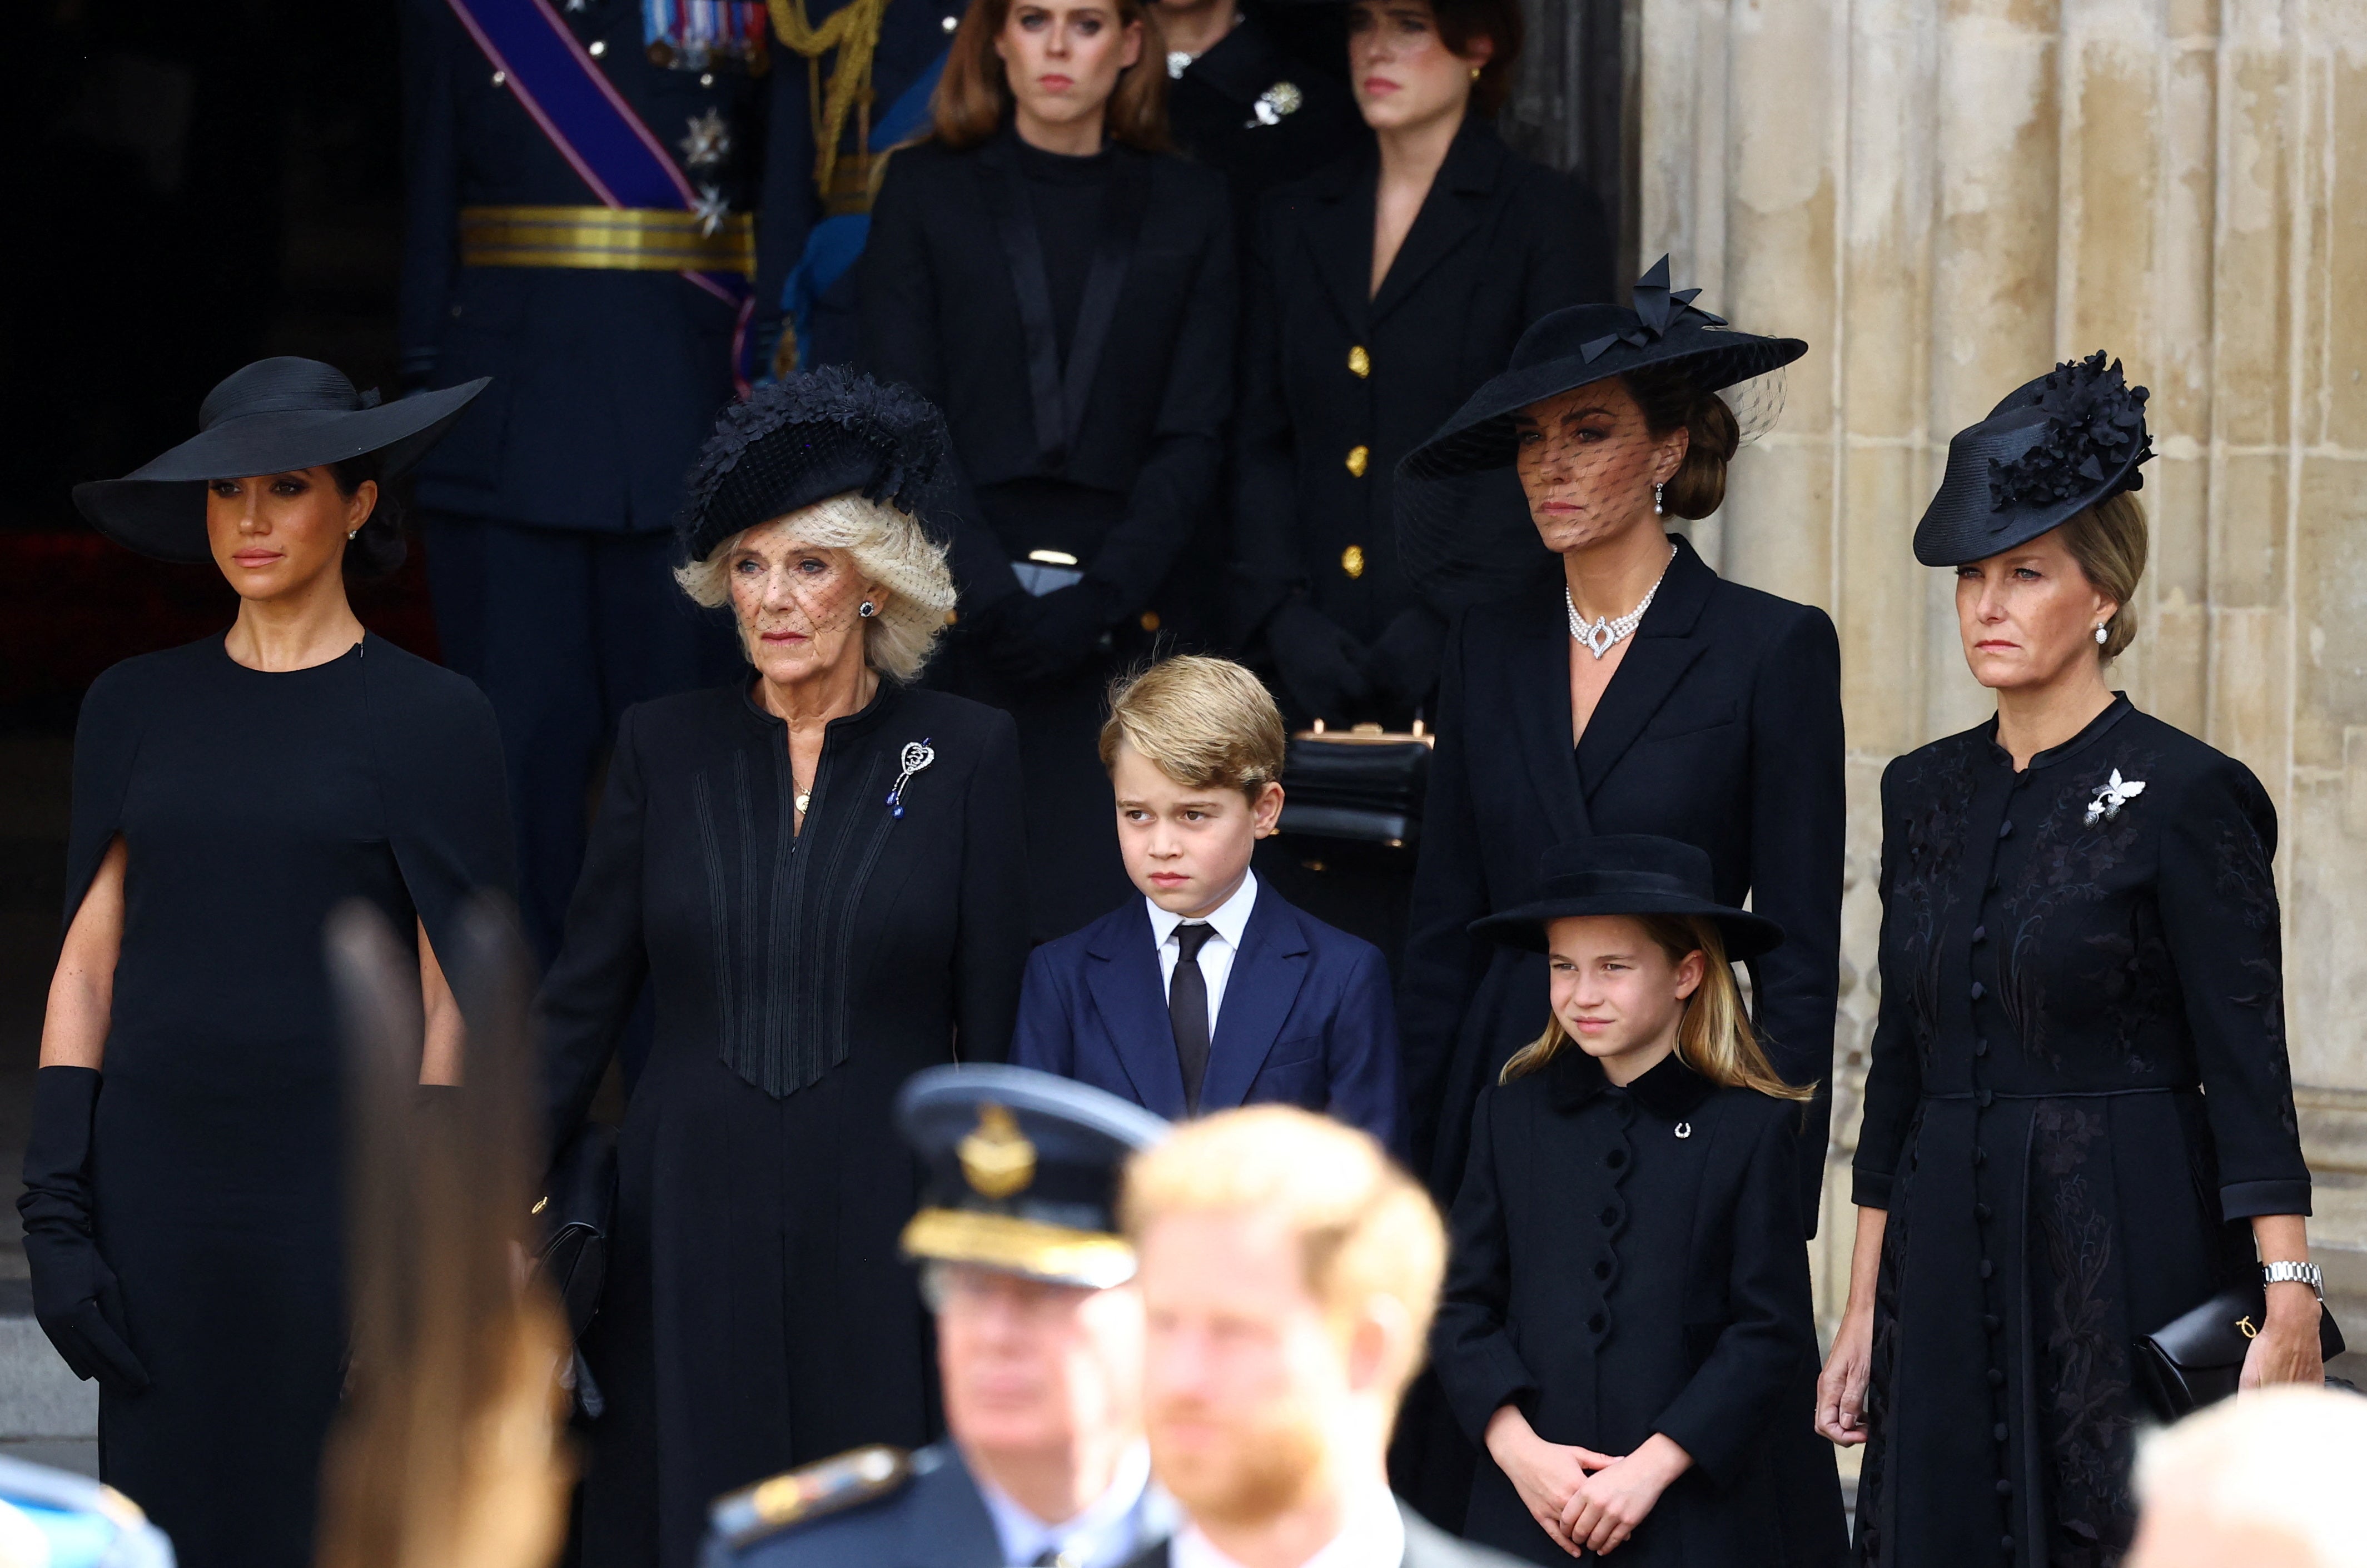 The Duchess of Sussex, Queen Consort, Prince George, Princess Charlotte, the Princess of Wales, and Sophie, Countess of Wessex outside Westminster Abbey